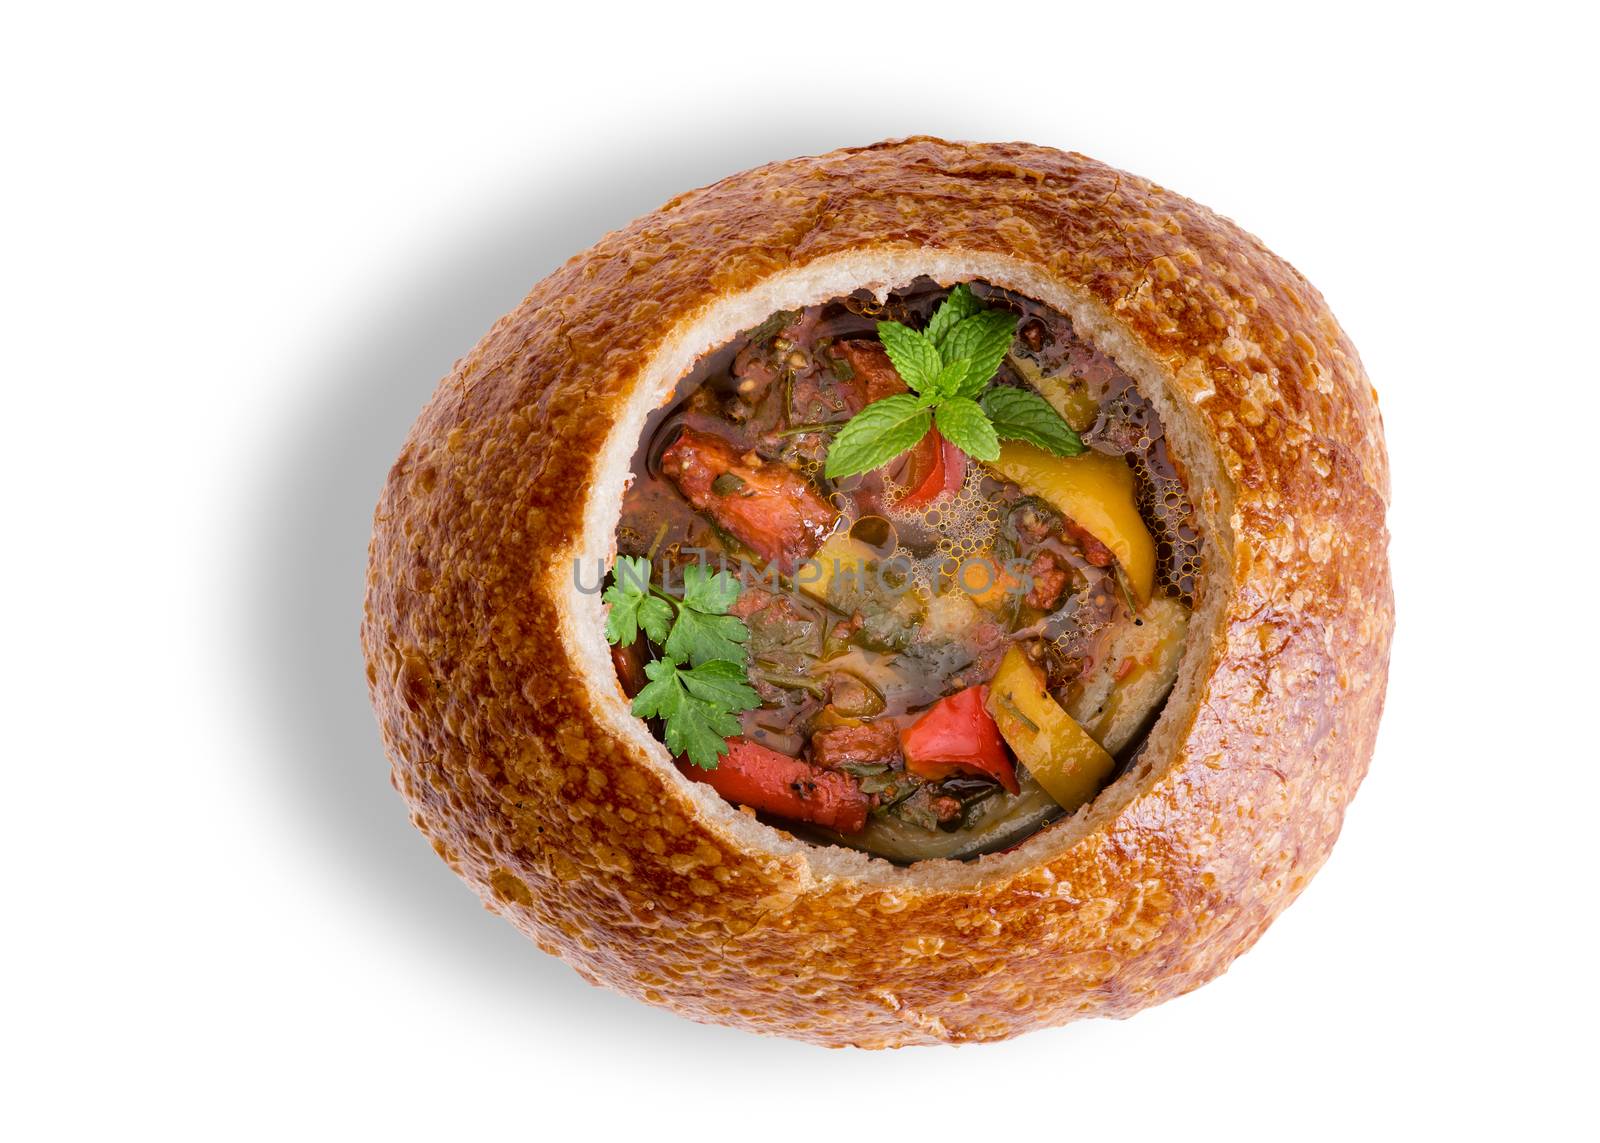 Wholesome vegetable soup in a sourdough bread bowl by coskun